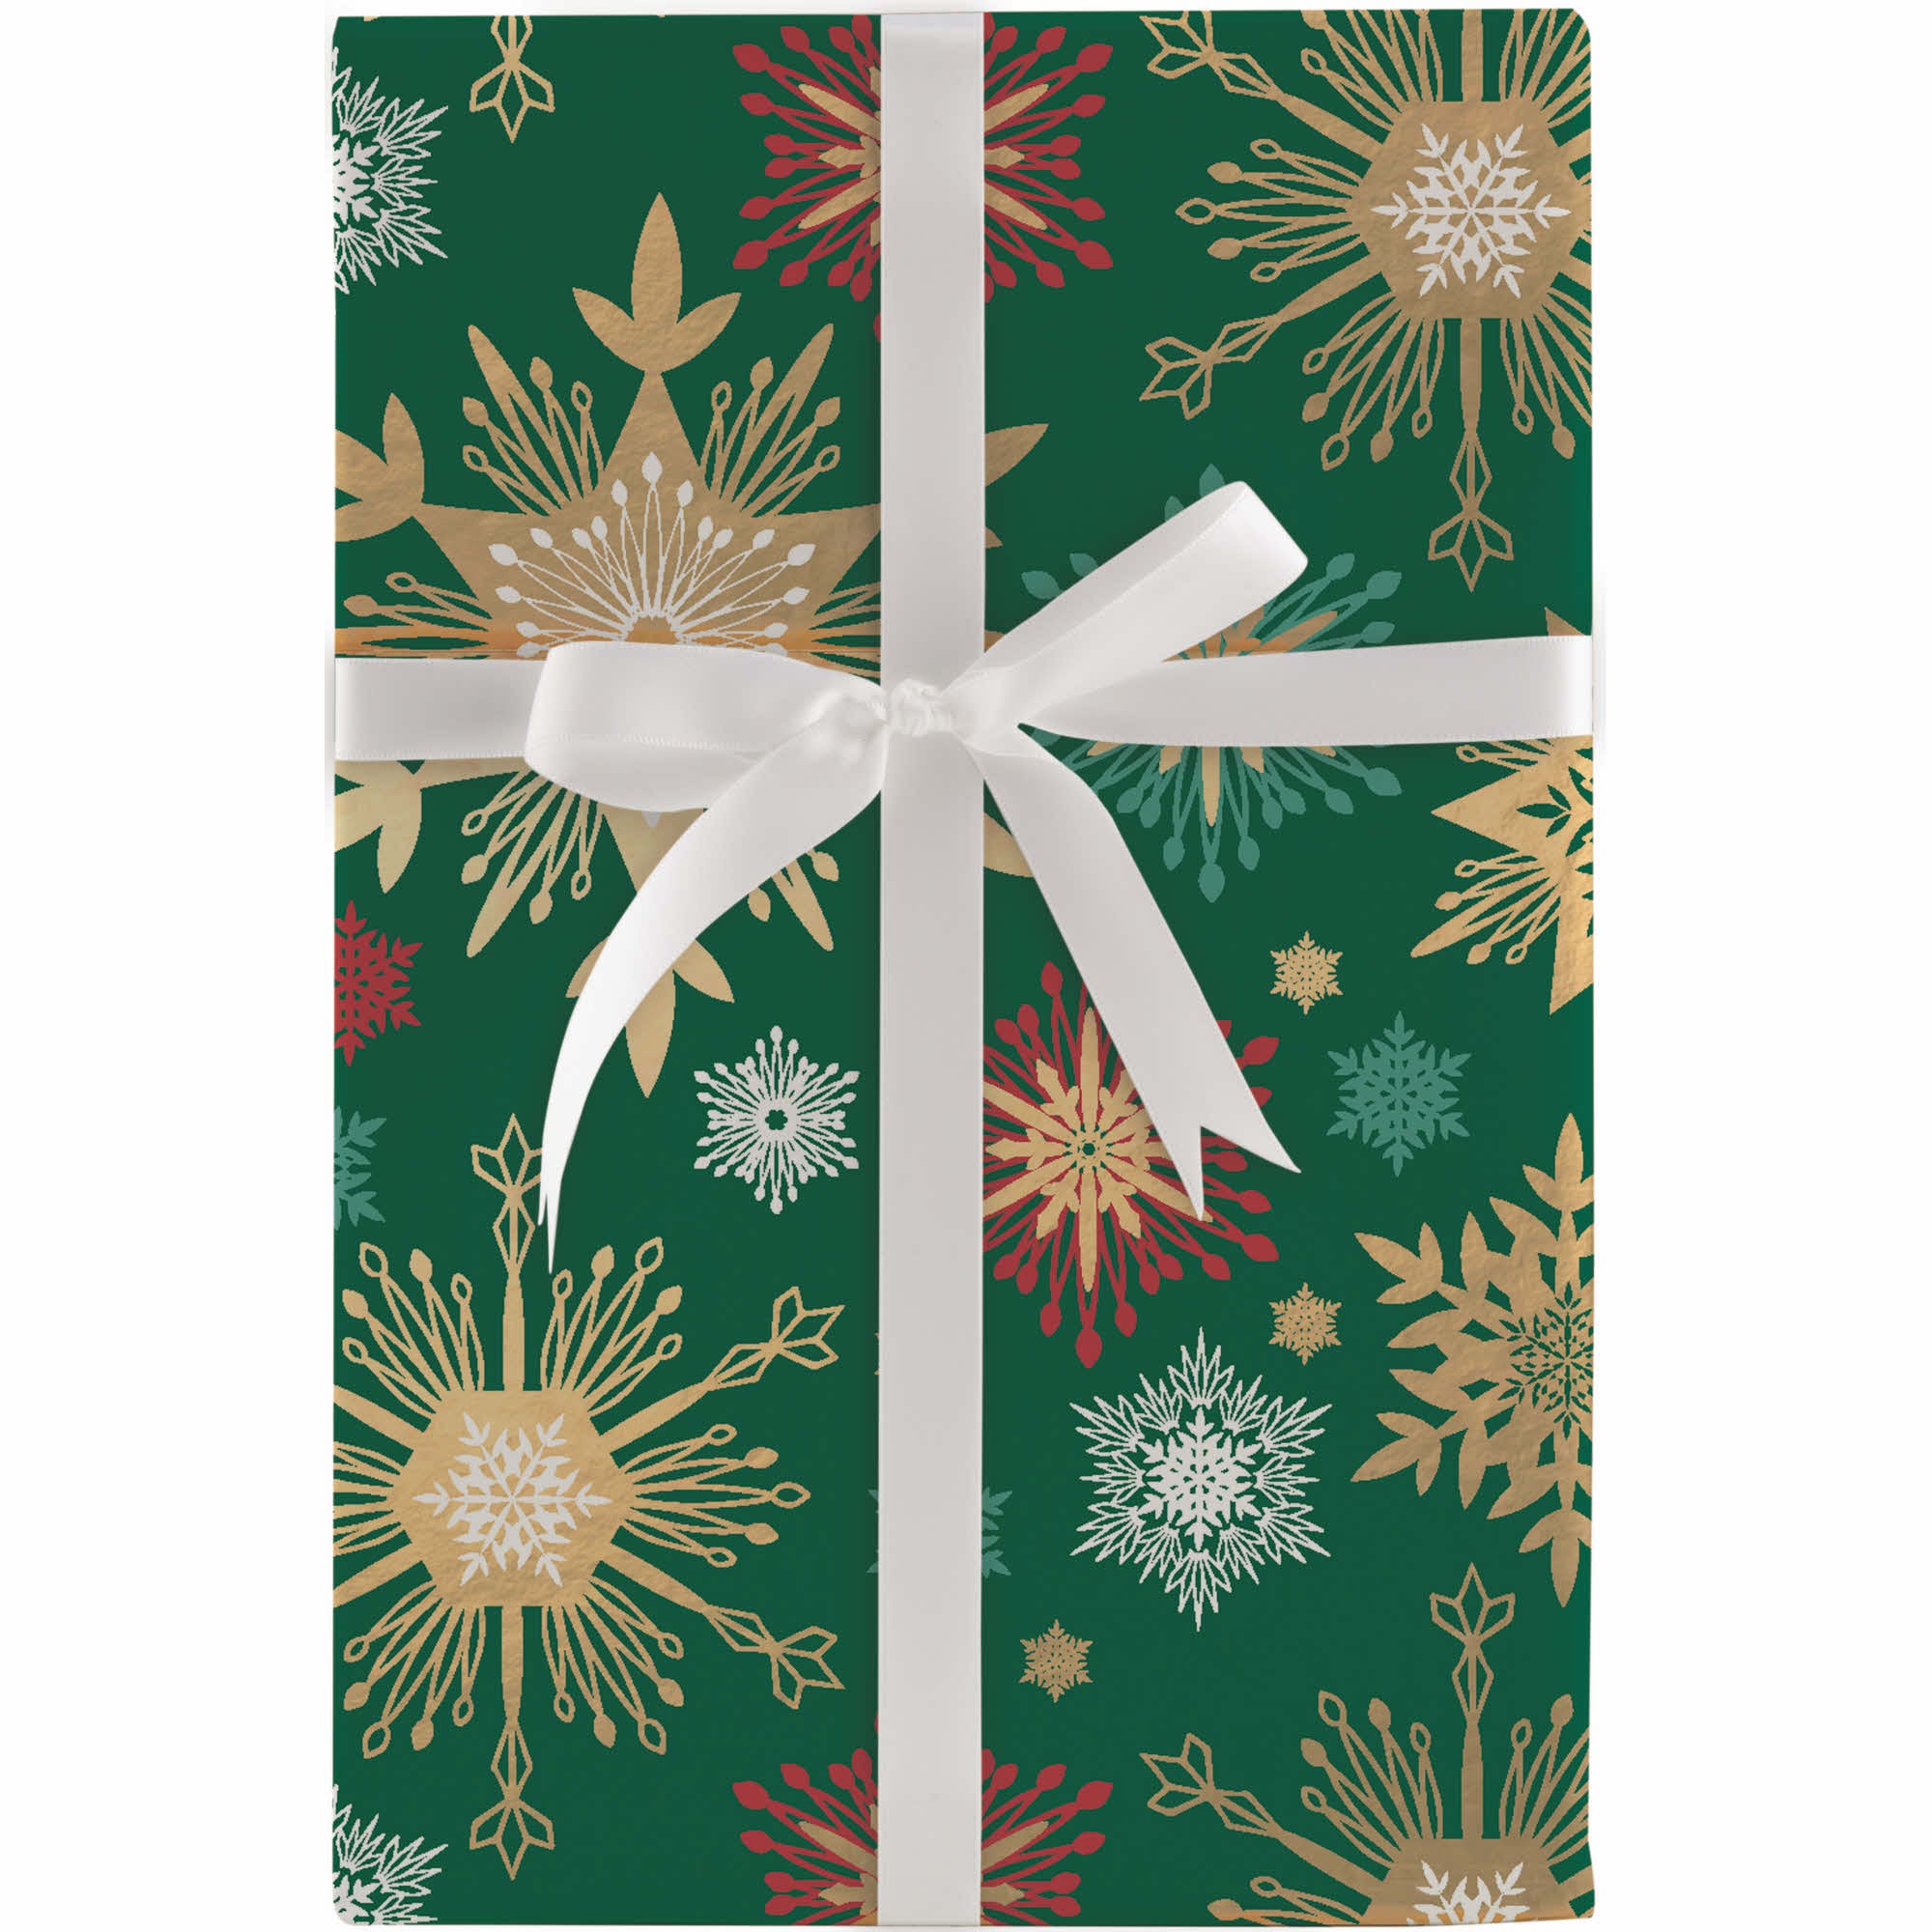 Design Design Continuous Roll Wrap - Holiday Snowflakes